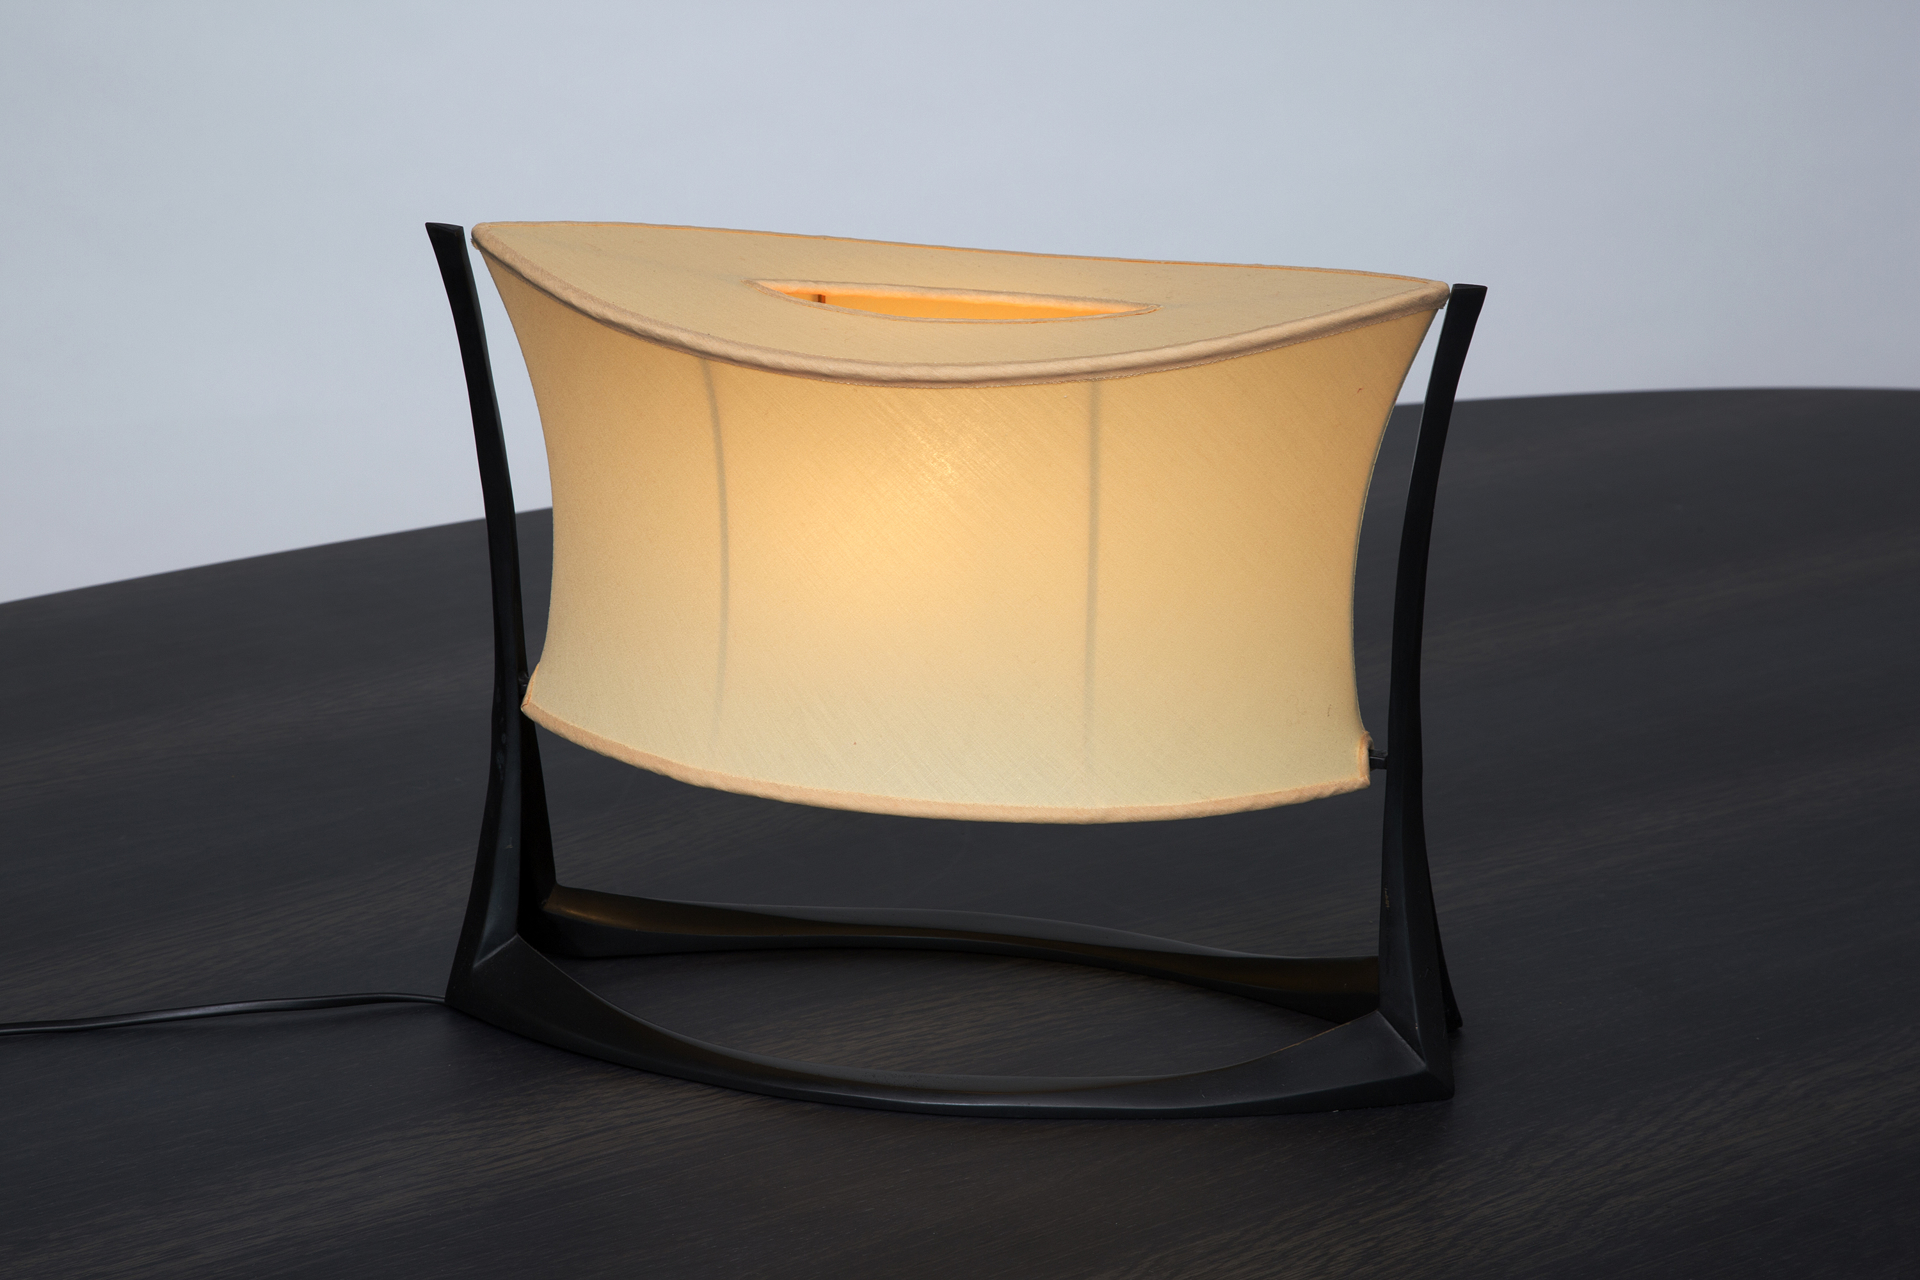 Table Lamp by Anasthasia Millot